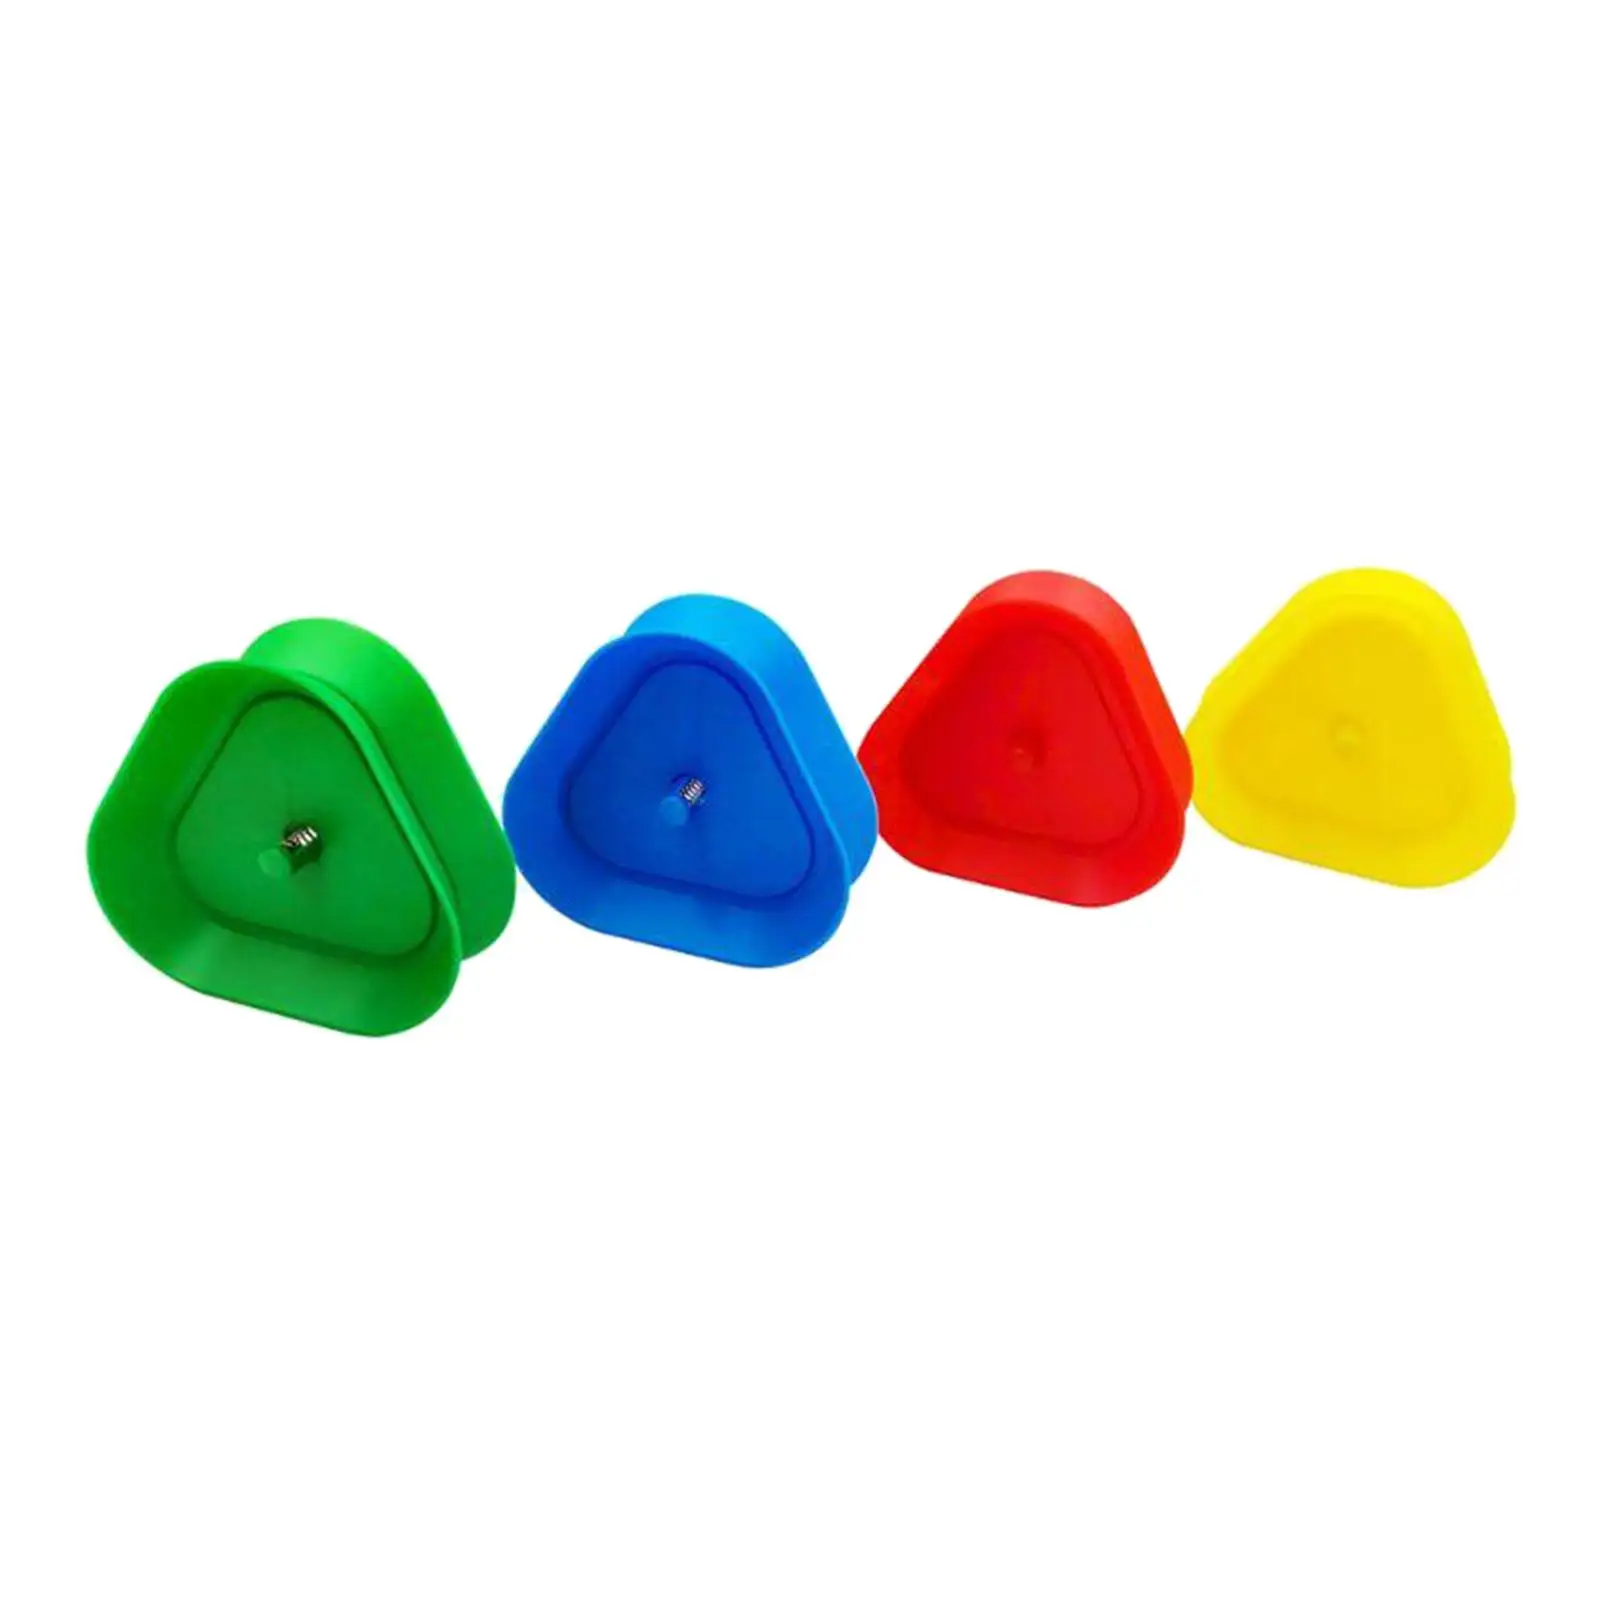 Set of 4 Triangle Shaped Poker Playing Card Holder Red Blue Green Yellow